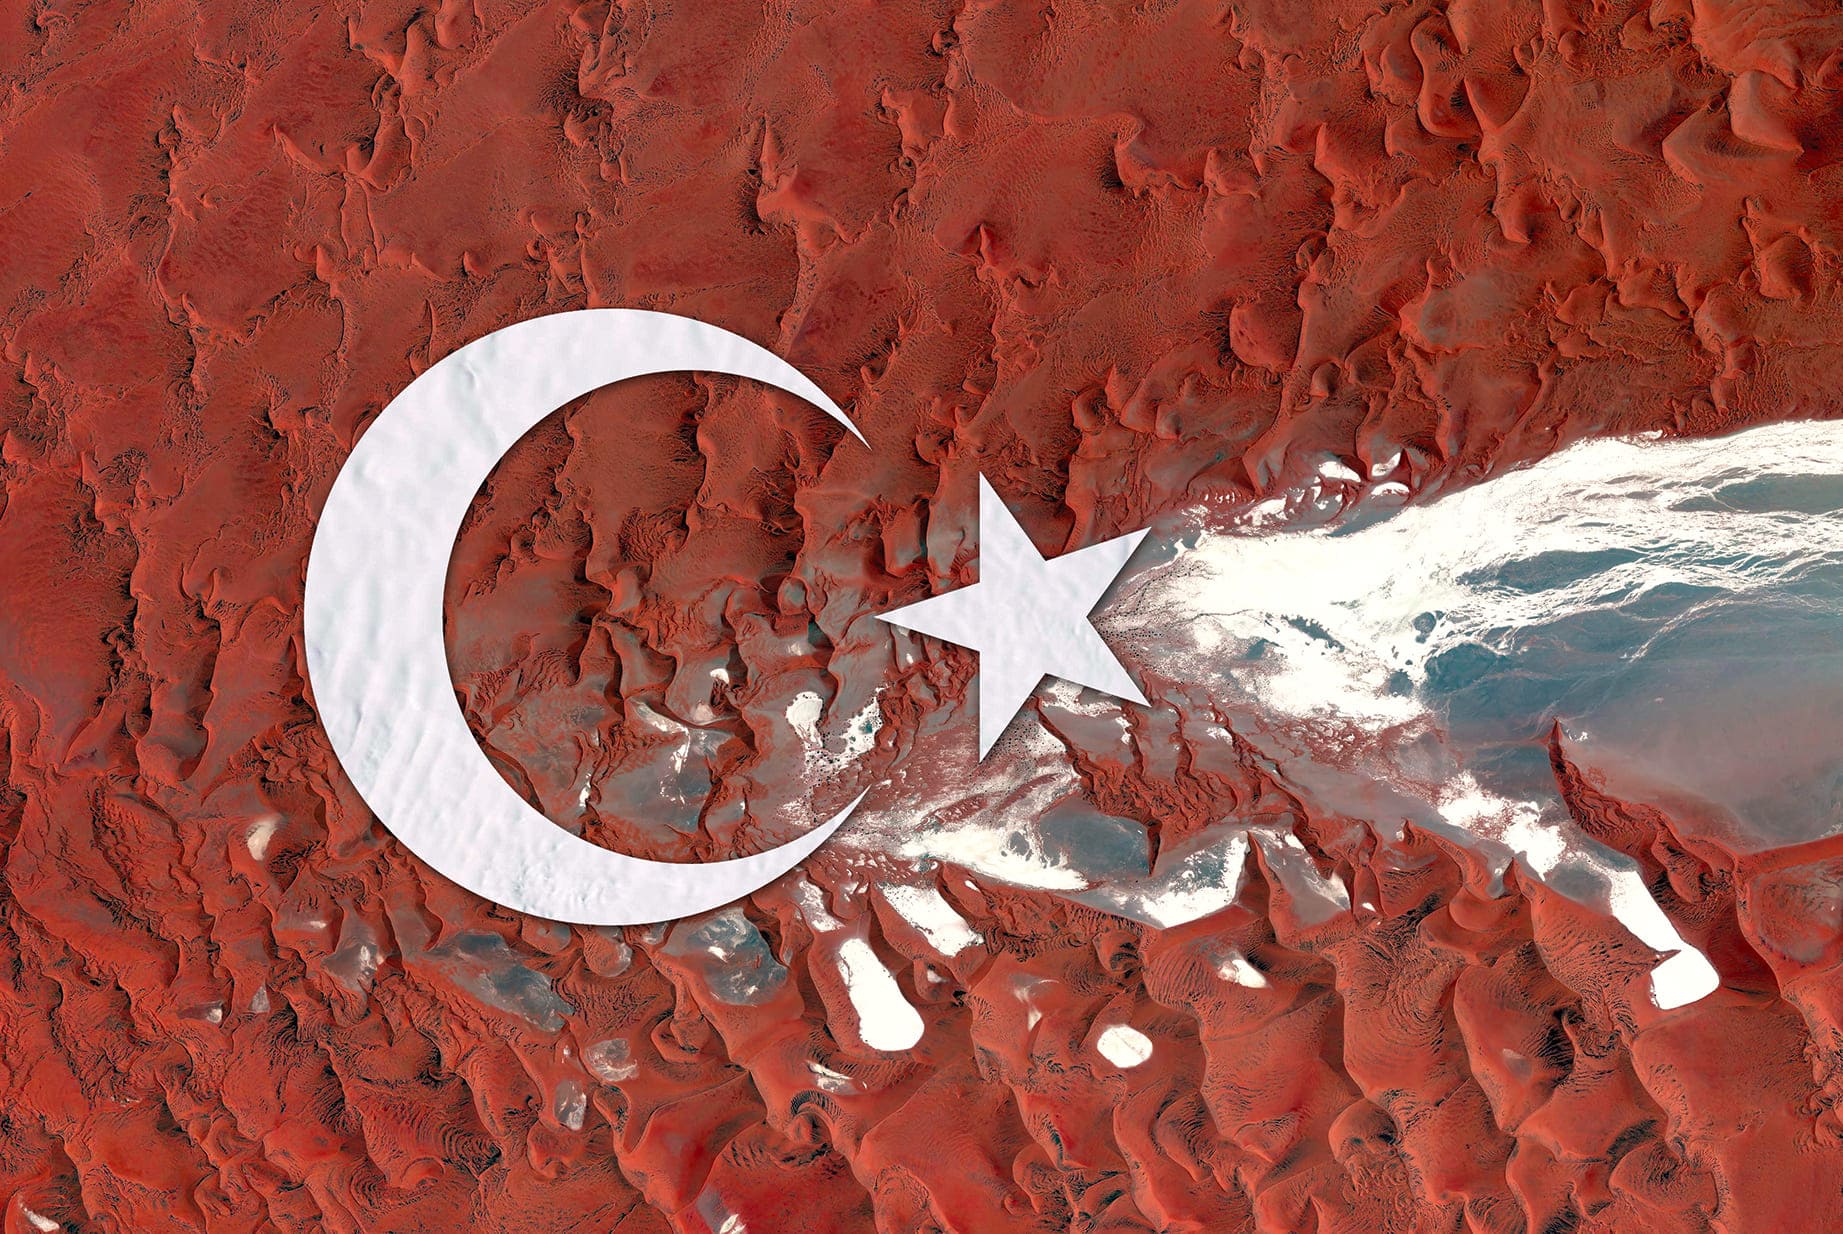 TURKEY EARTH FLAG, 2016, DIGITAL COLLAGE OF SATELLITE PHOTOGRAPHY FROM NAMIBIA, ANTARCTICA, diasec print CM 67×100, edition of 9